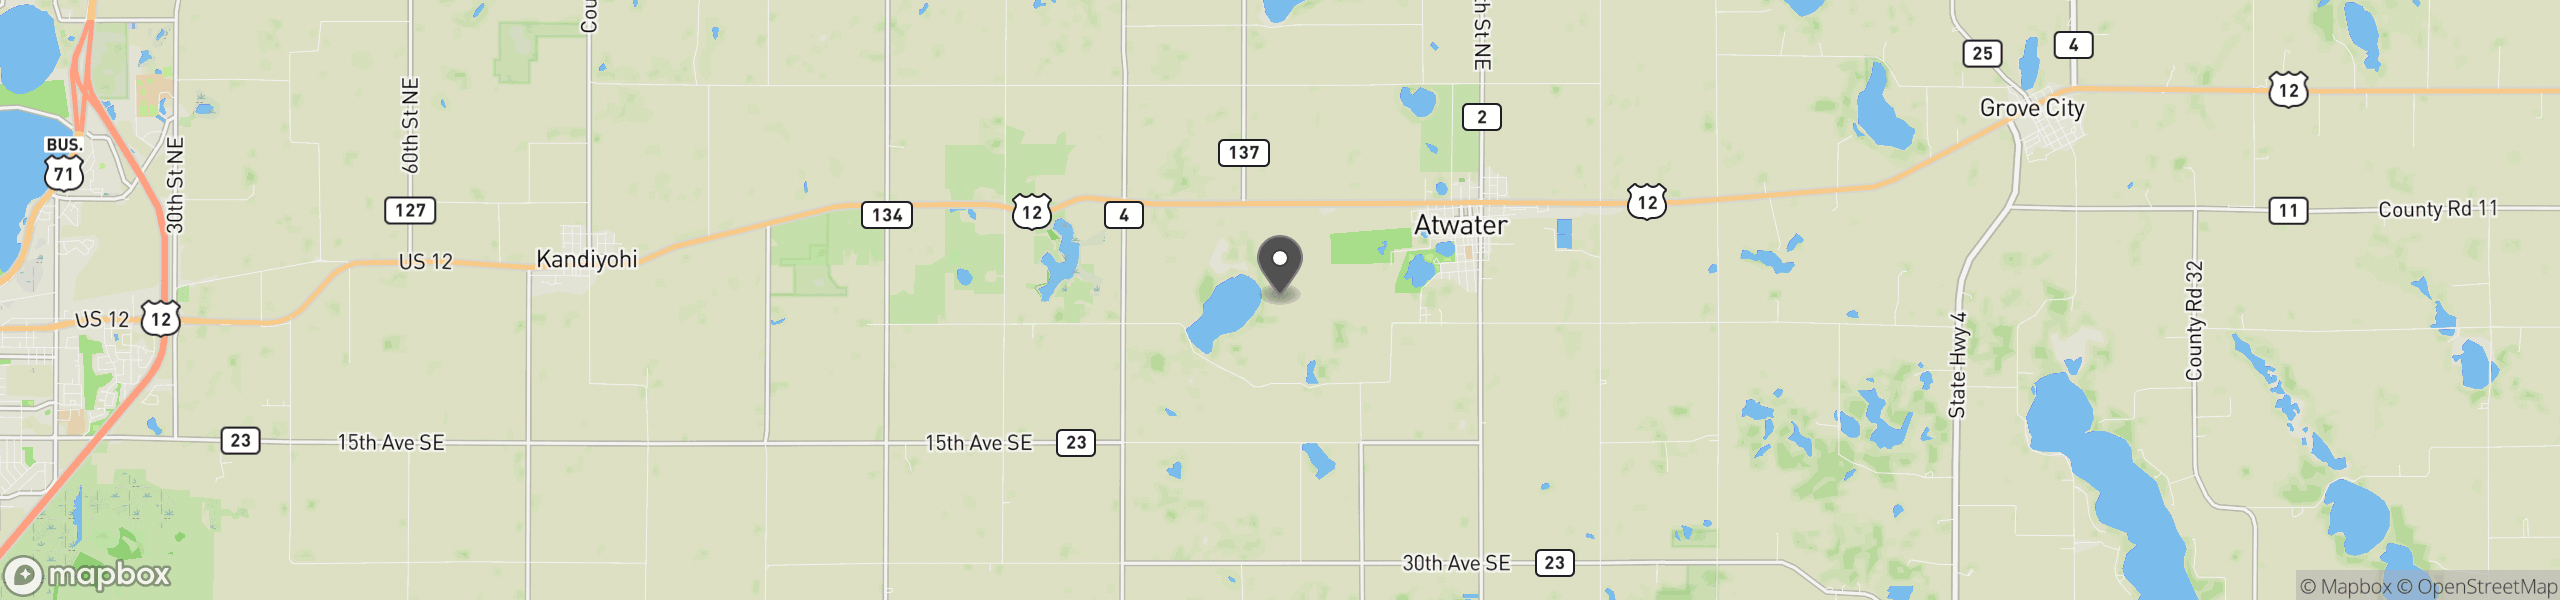 Atwater, MN